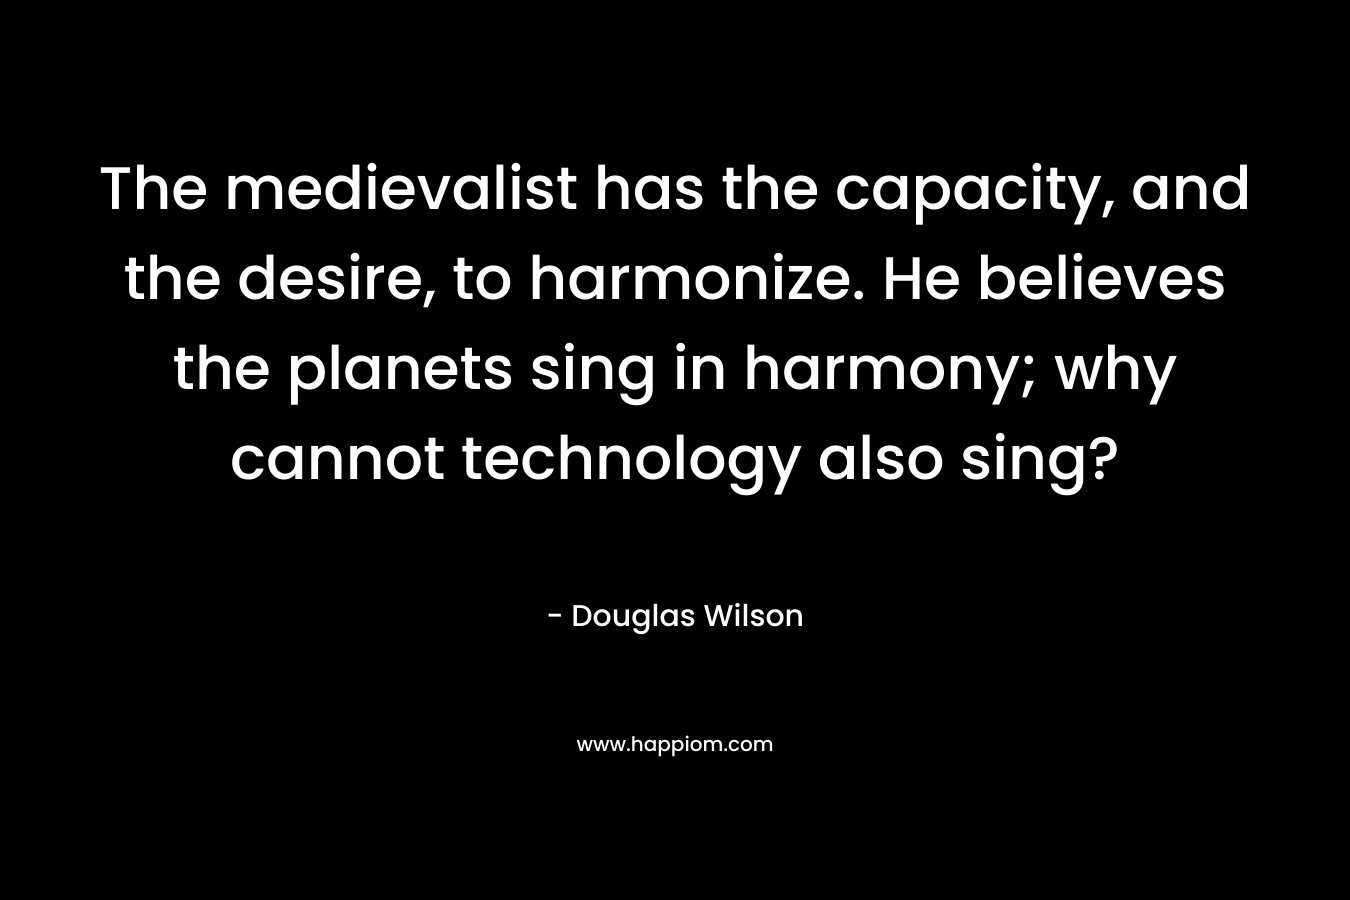 The medievalist has the capacity, and the desire, to harmonize. He believes the planets sing in harmony; why cannot technology also sing?